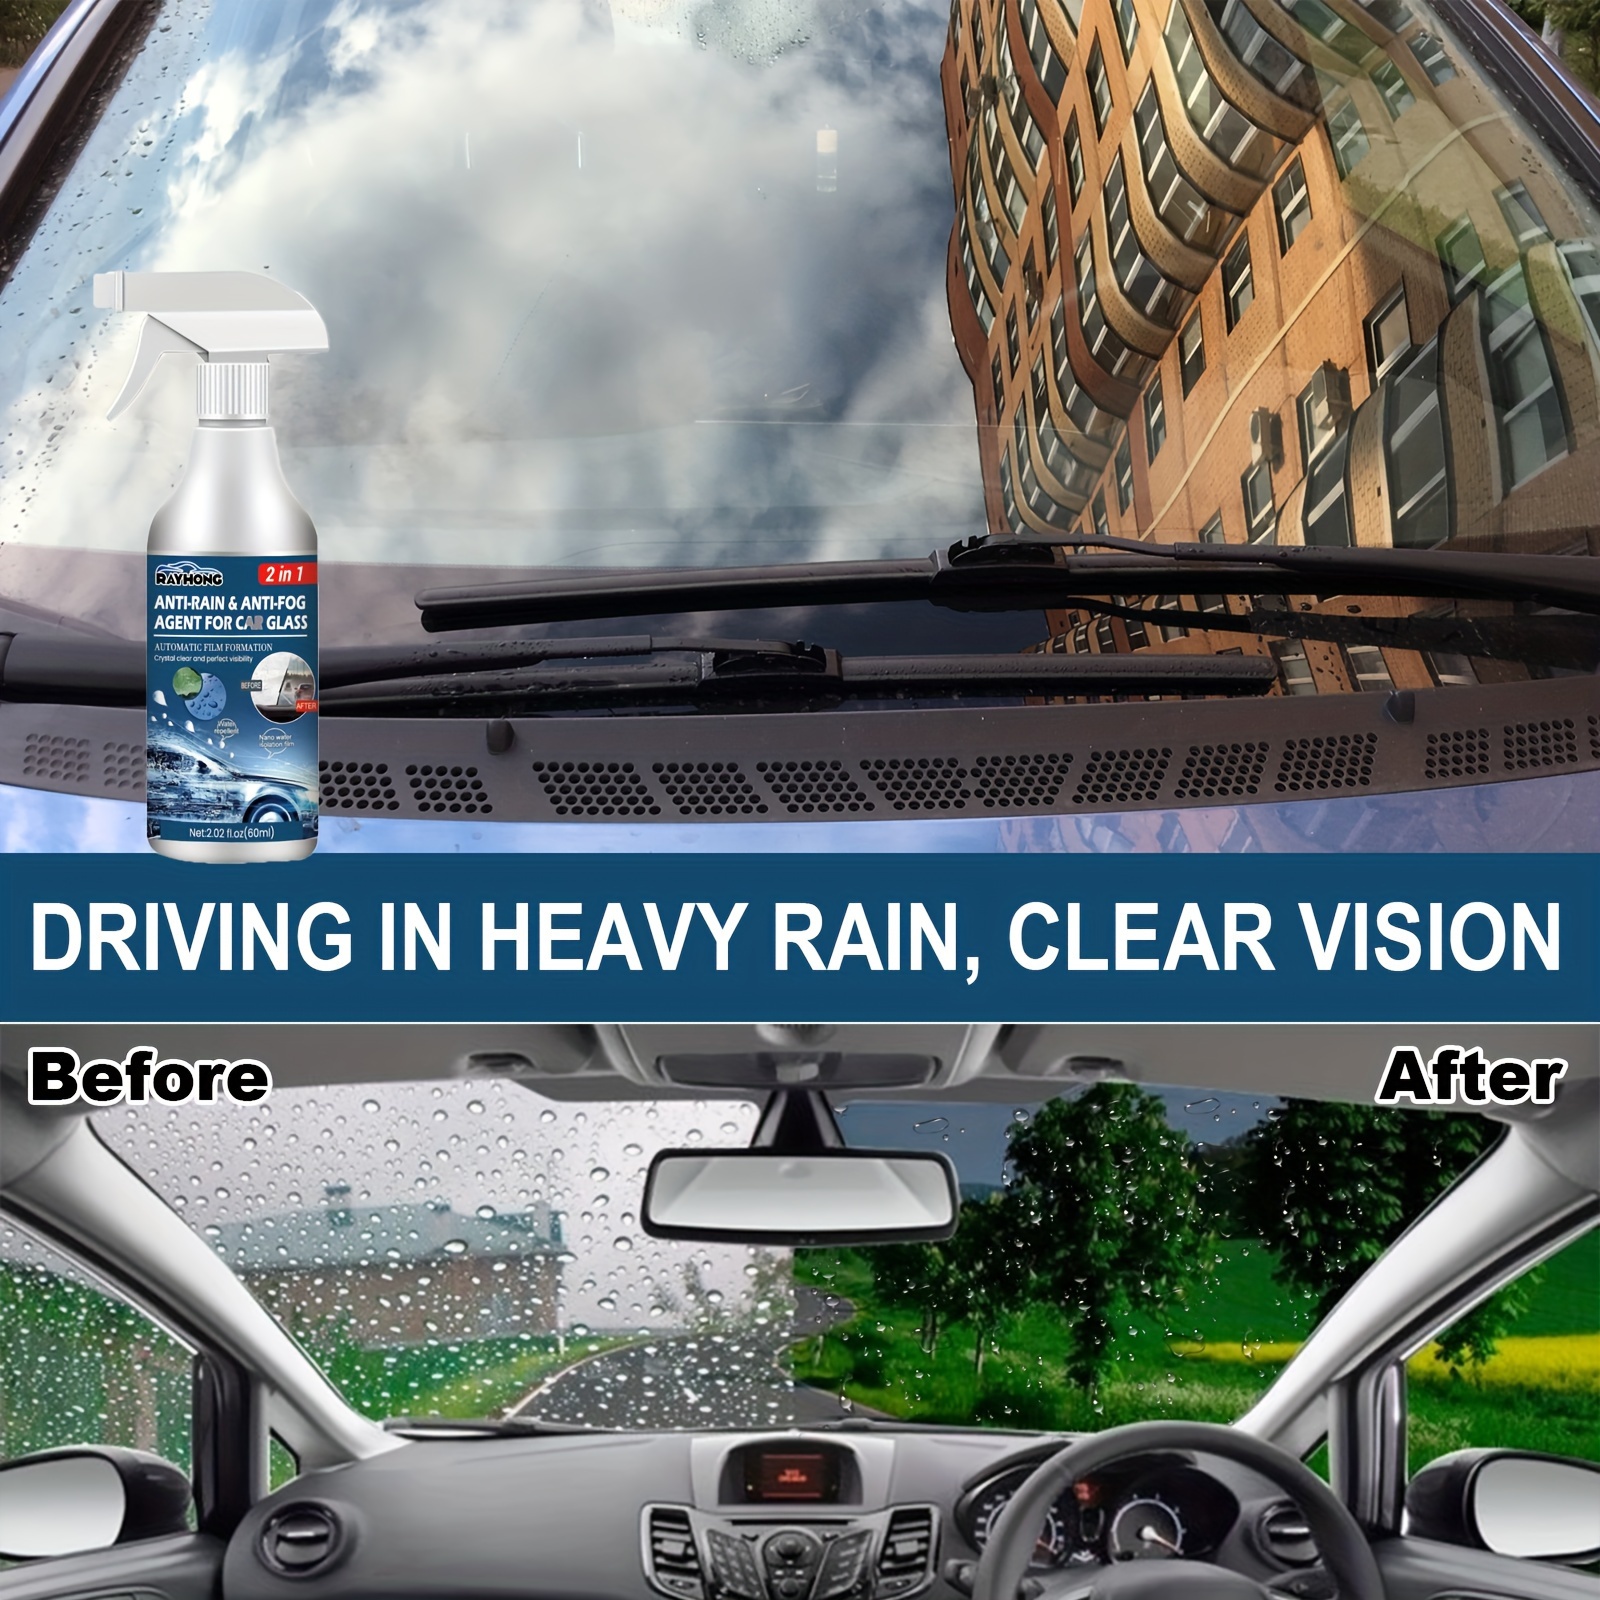 1pc Car Glass Anti-fog Agent, Long-lasting Anti-fog Agent For Car Glass And  Helmets, Easily Remove Fog From Windshield And Window, Glass, Mirrors